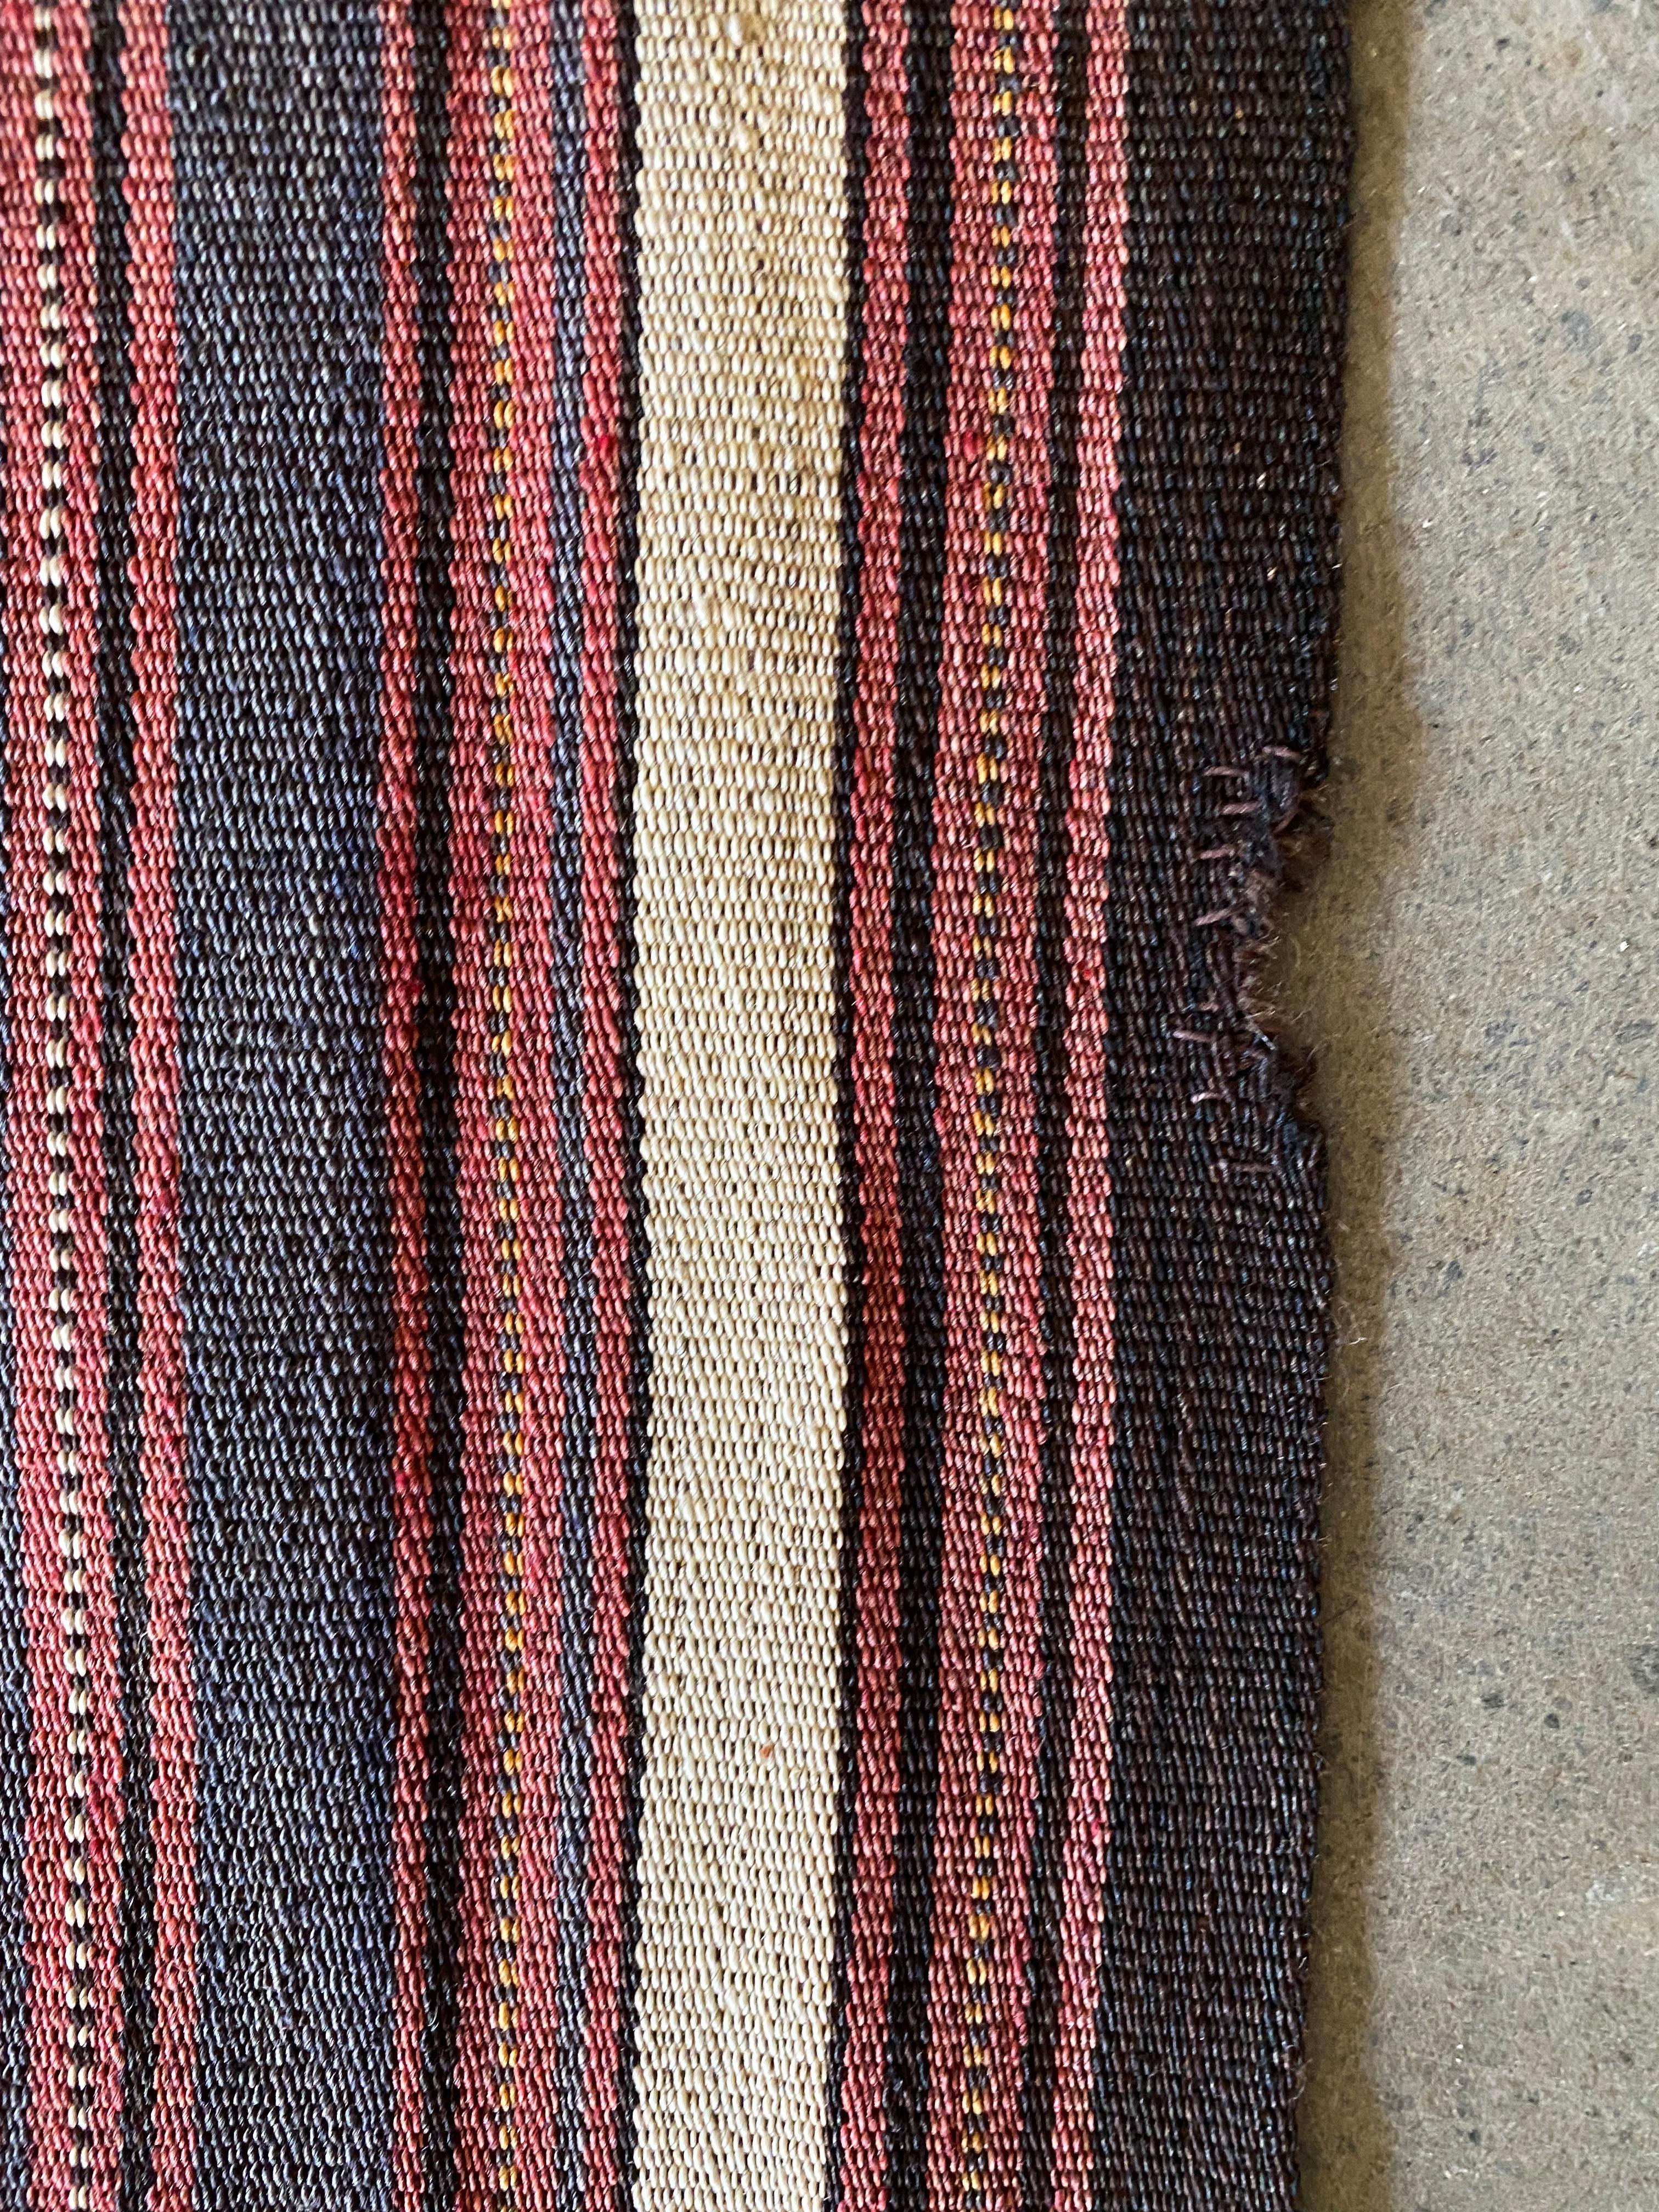 Striped, Multicoloured Turkish Wool Kilim Rug, Early 20th Century For Sale 5